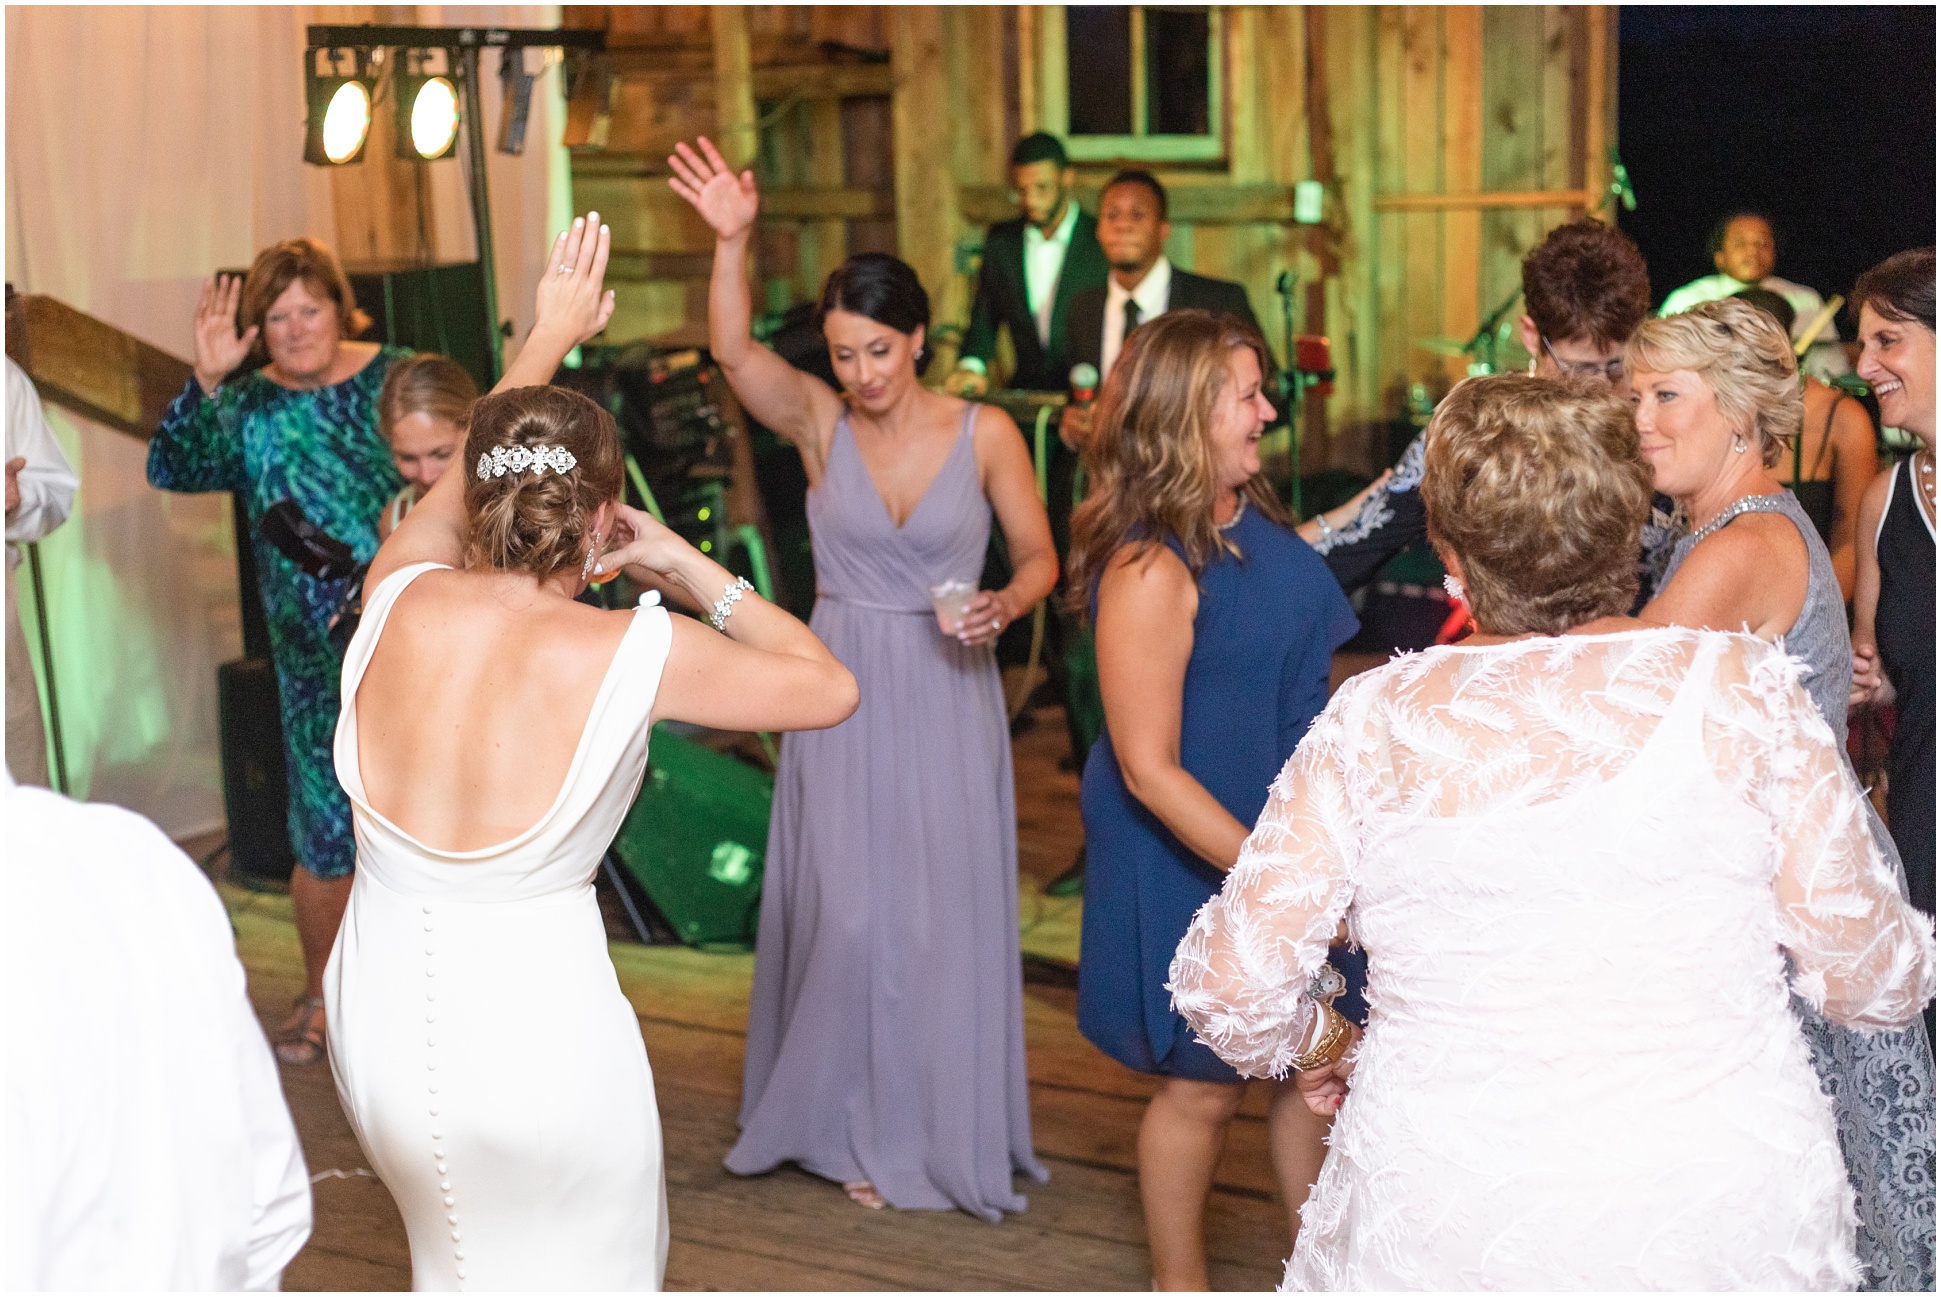 Guests dancing in the Magley farm during the reception